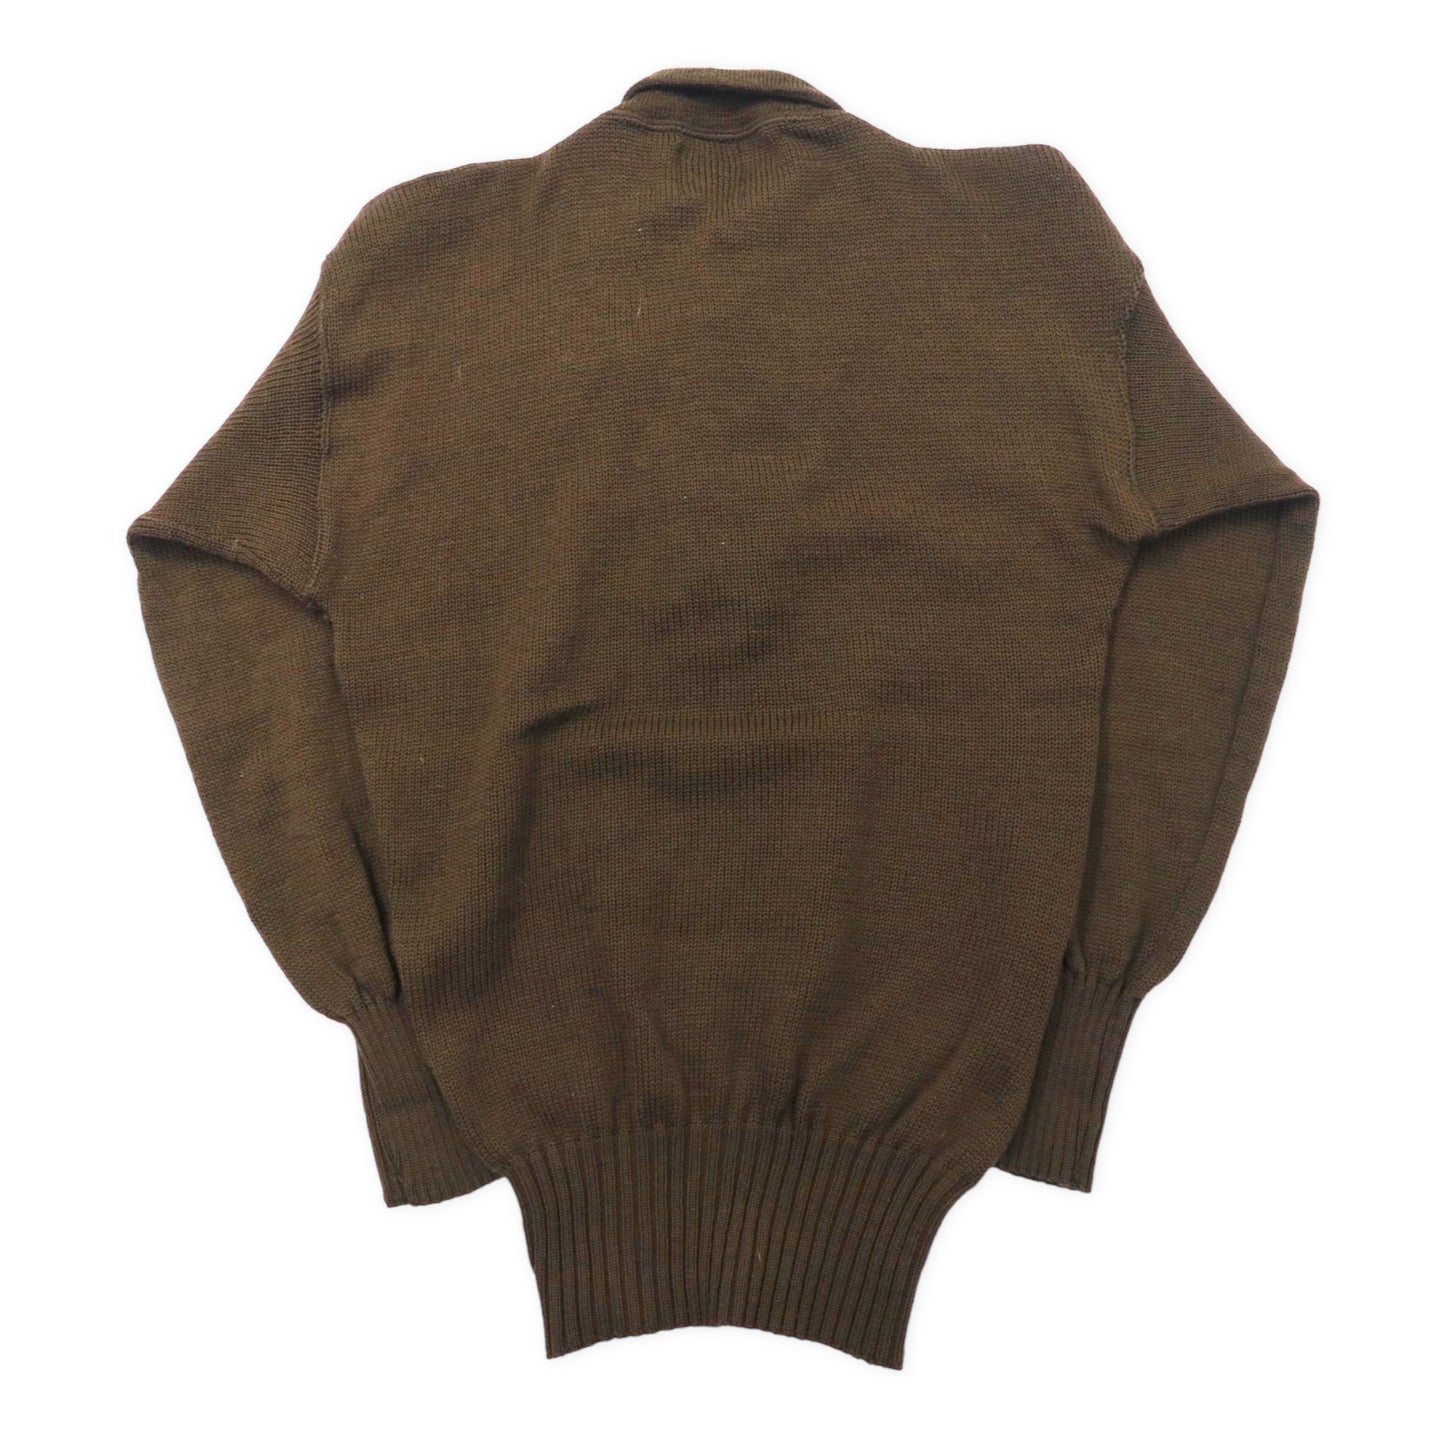 US ARMY 80's 5 button High-necked jeetter command knit XL KHAKI